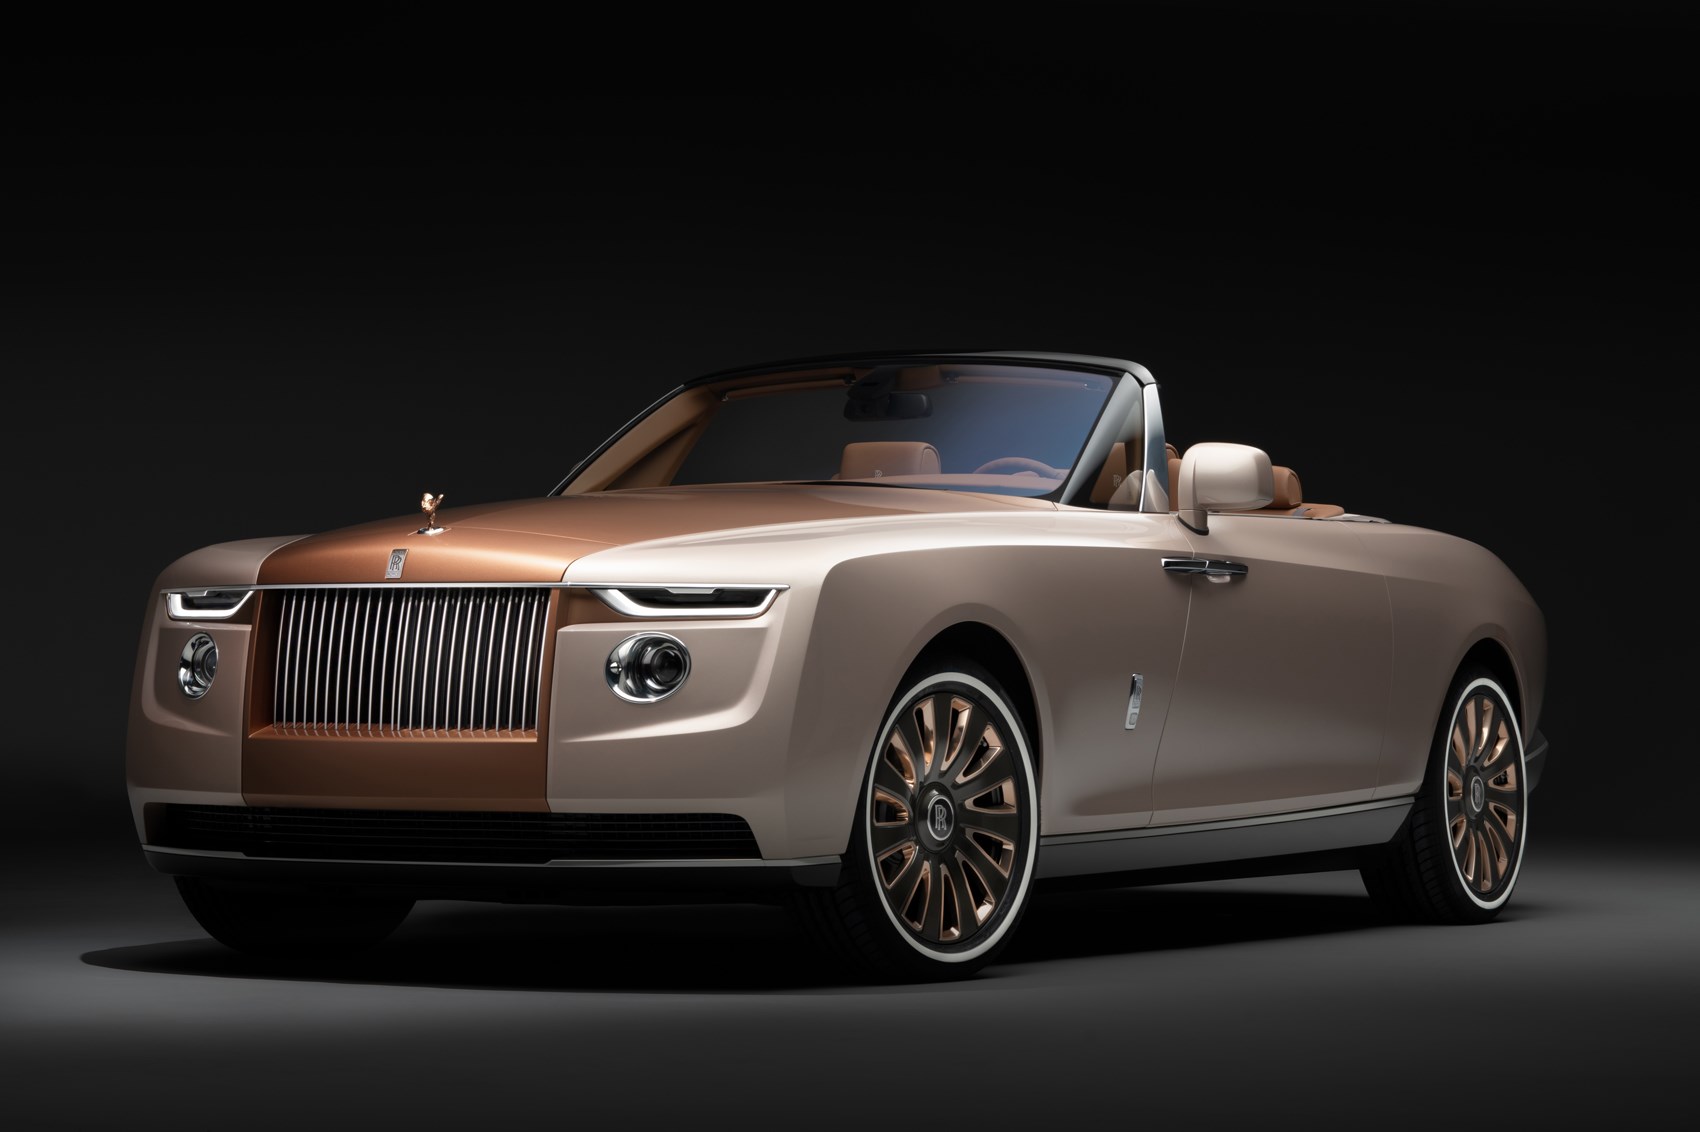 Meet the Rolls-Royce Boat-Tail, the most expensive and luxurious